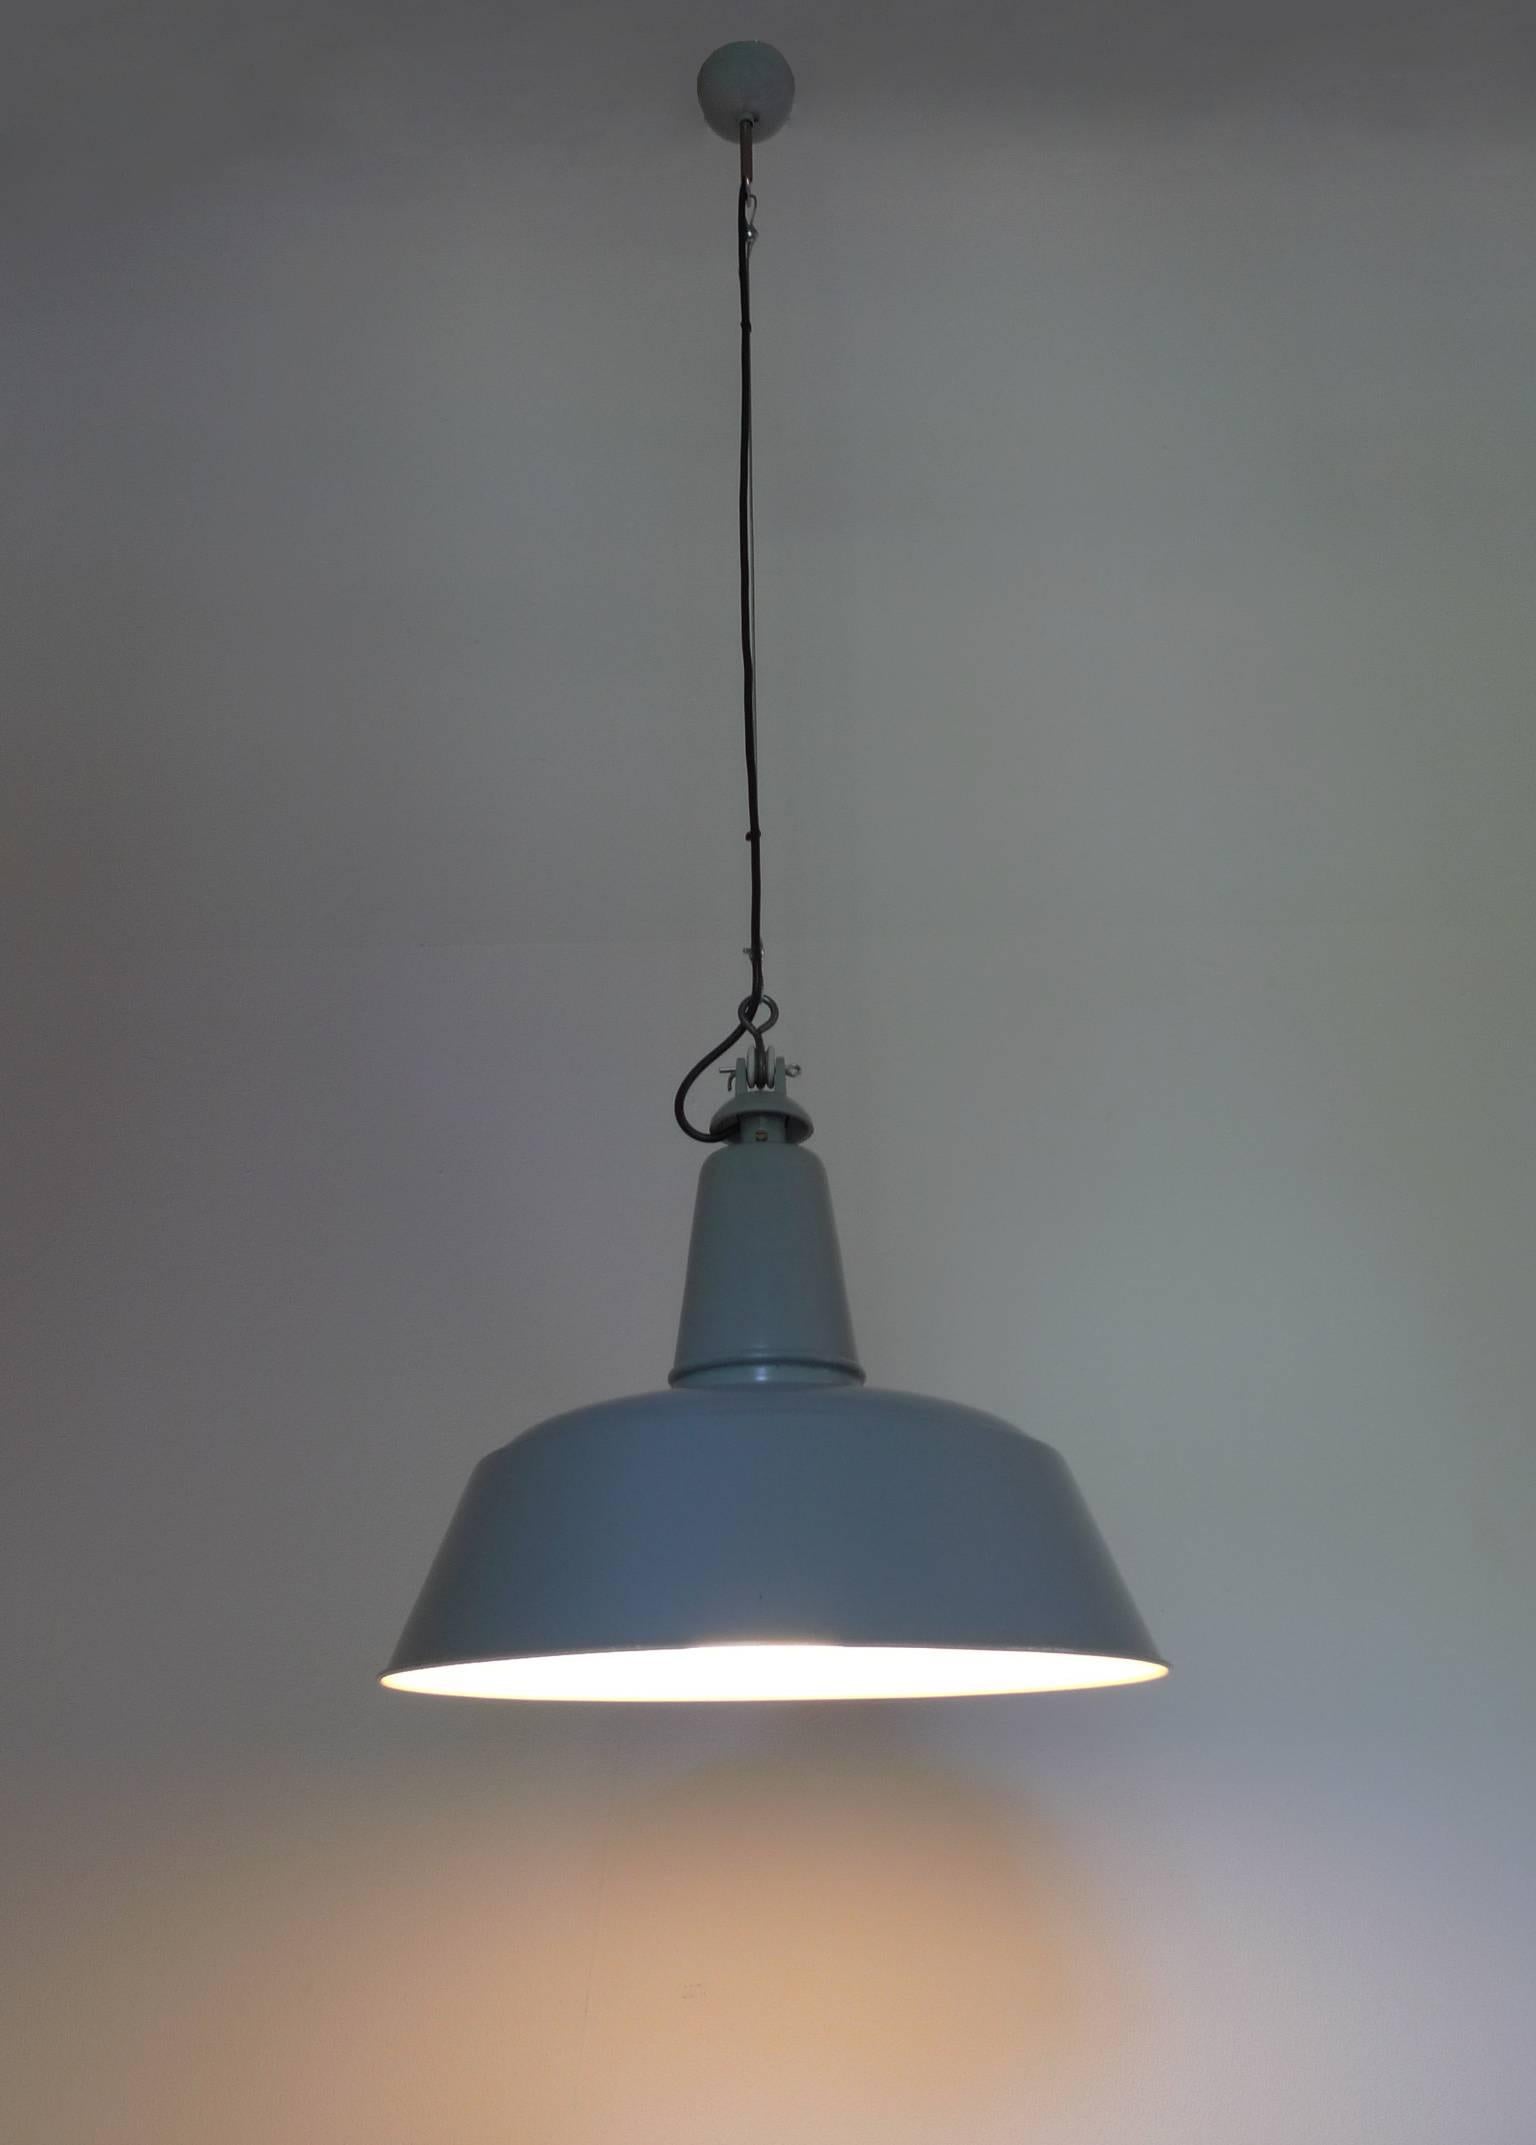 20th Century German Light-Gray Metal Industrial Pendant from the 1950s